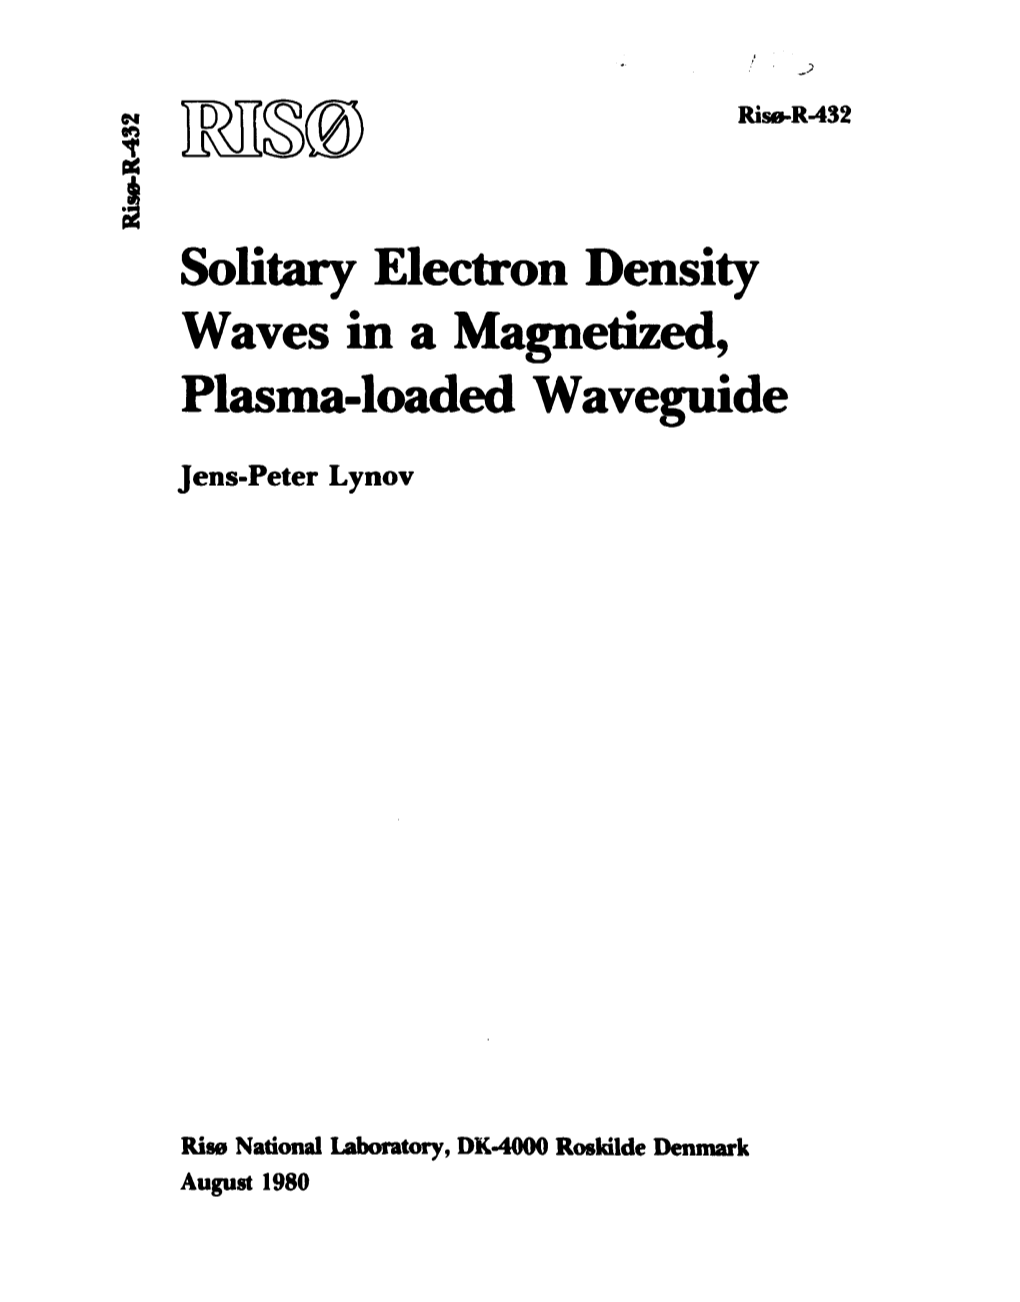 Solitary Electron Density Waves in a Magnetized, Plasma-Loaded Waveguide